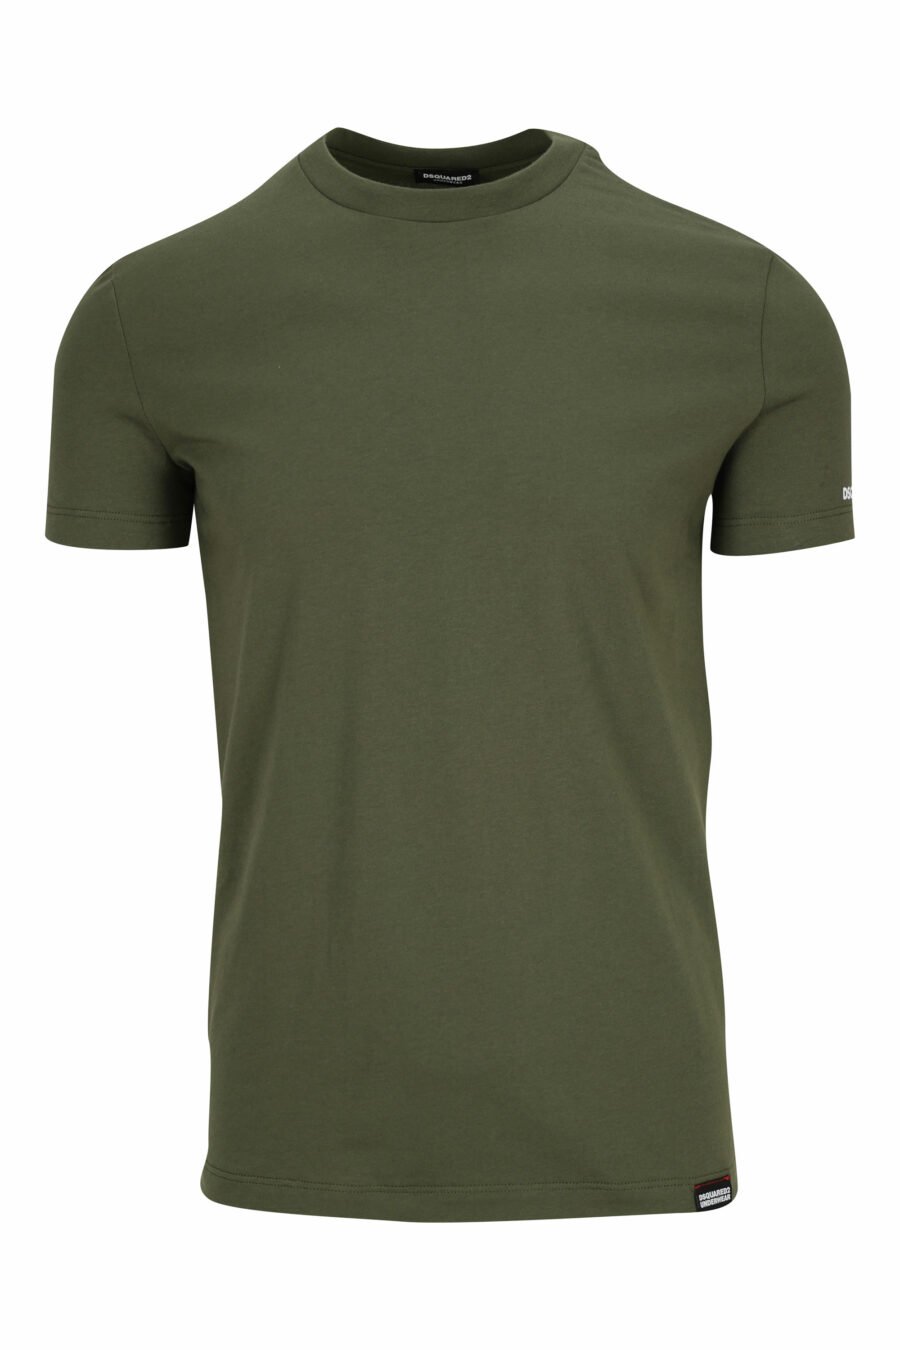 Military green T-shirt with white underwear minilogue - 8032674811622